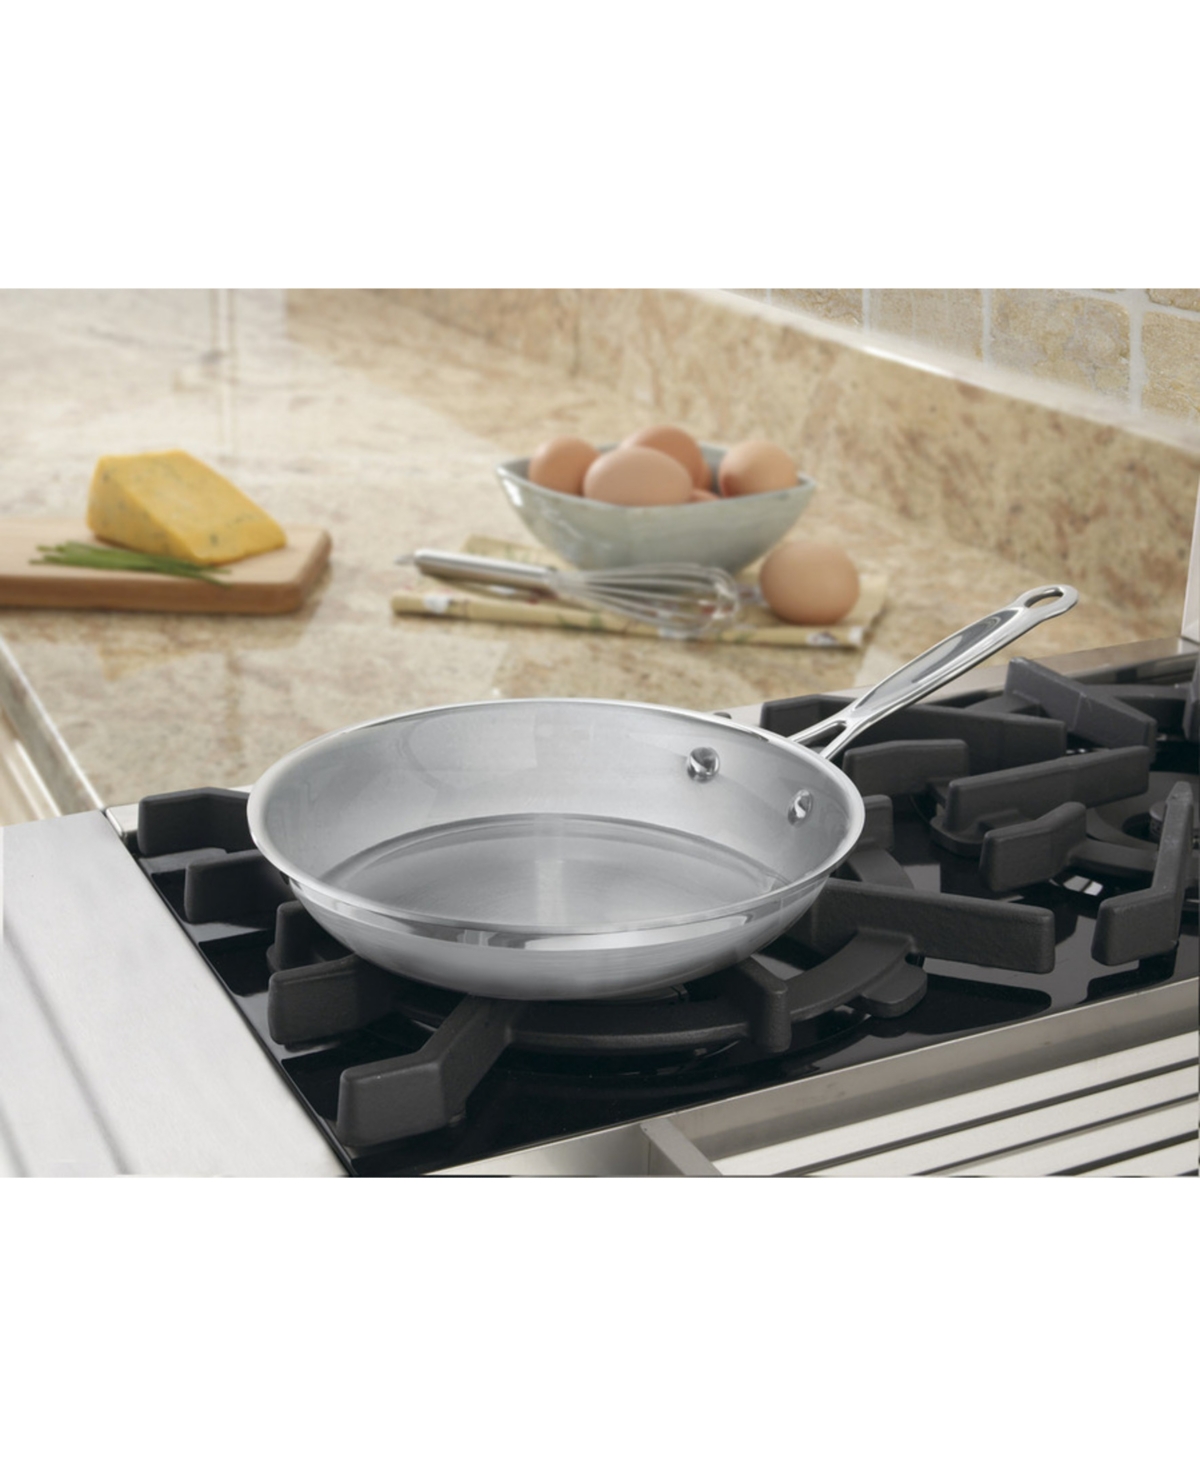 Cuisinart Multiclad Pro 8" Skillet In Stainless Steel